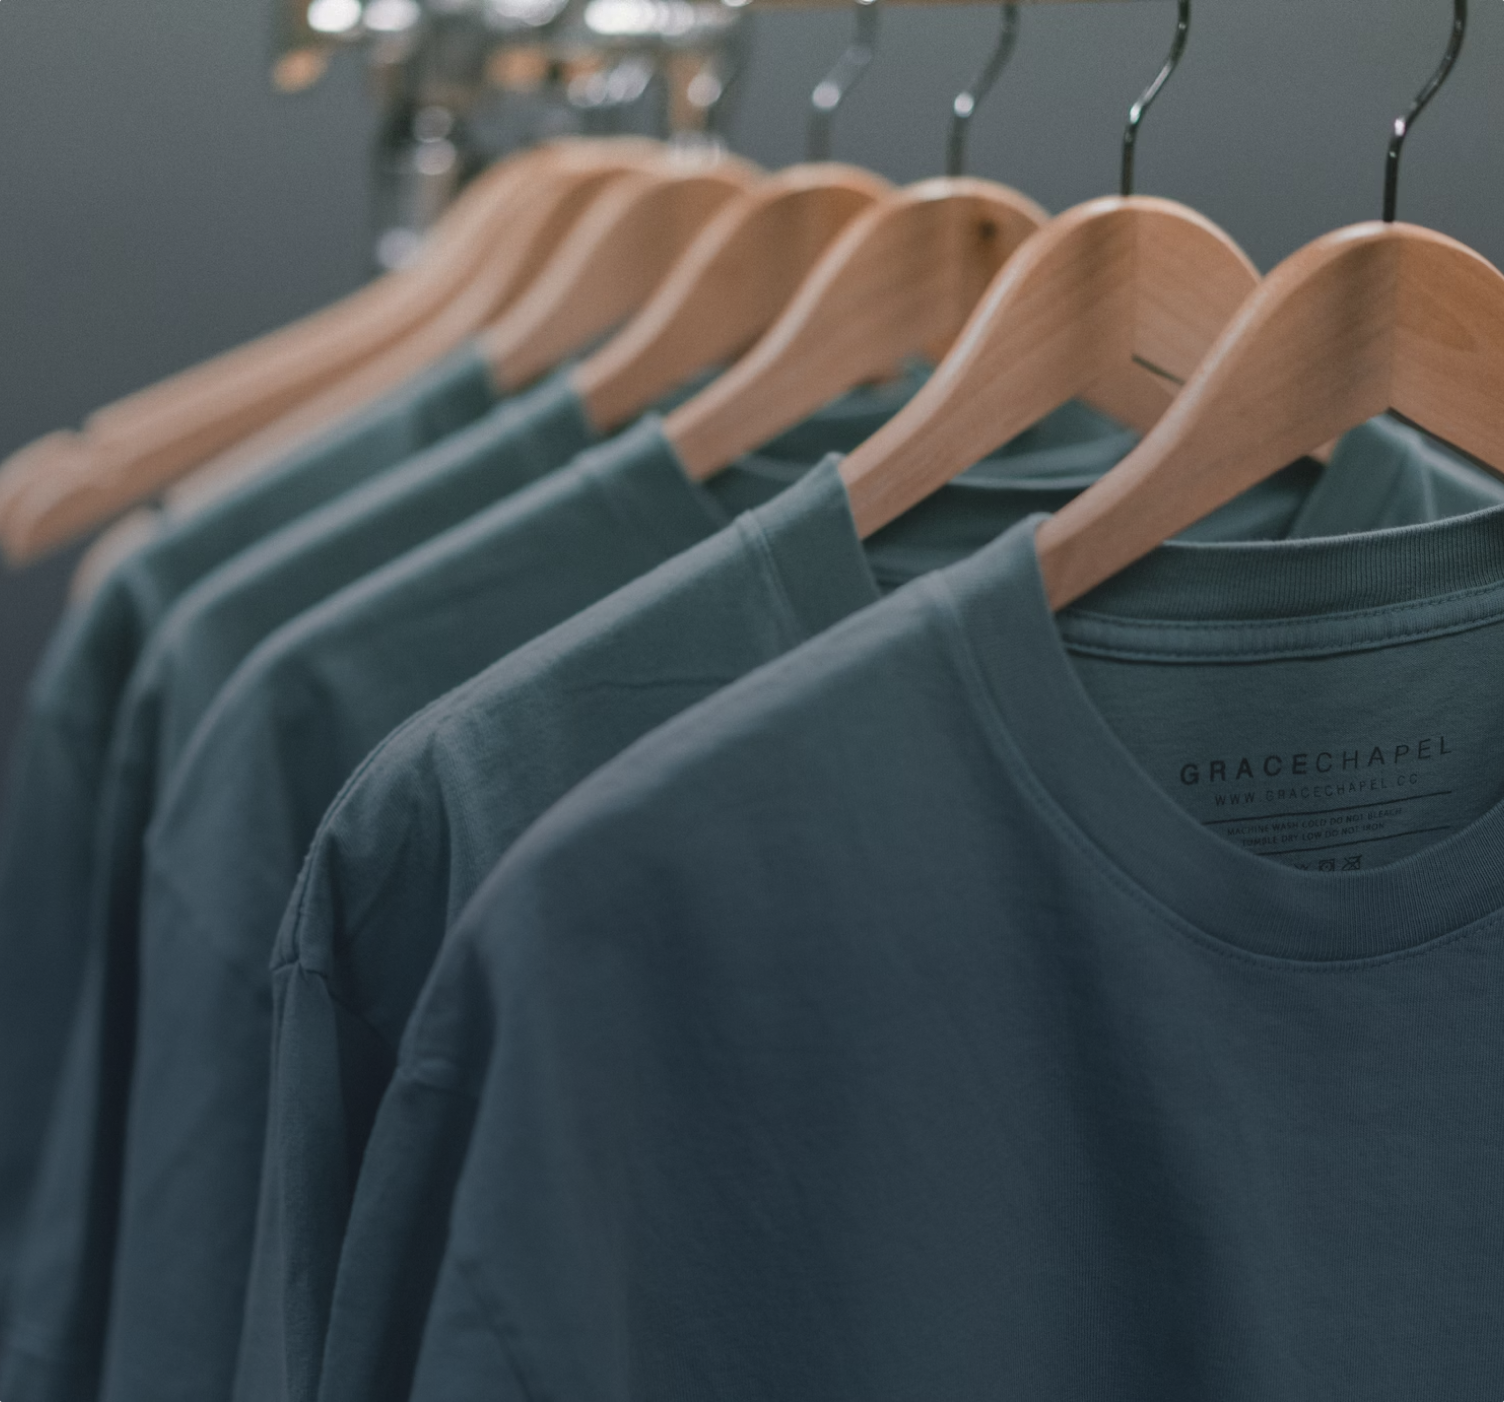 a rack of blue, sustainably sourced and manufactured long-sleeve t-shirts on coat hangers.